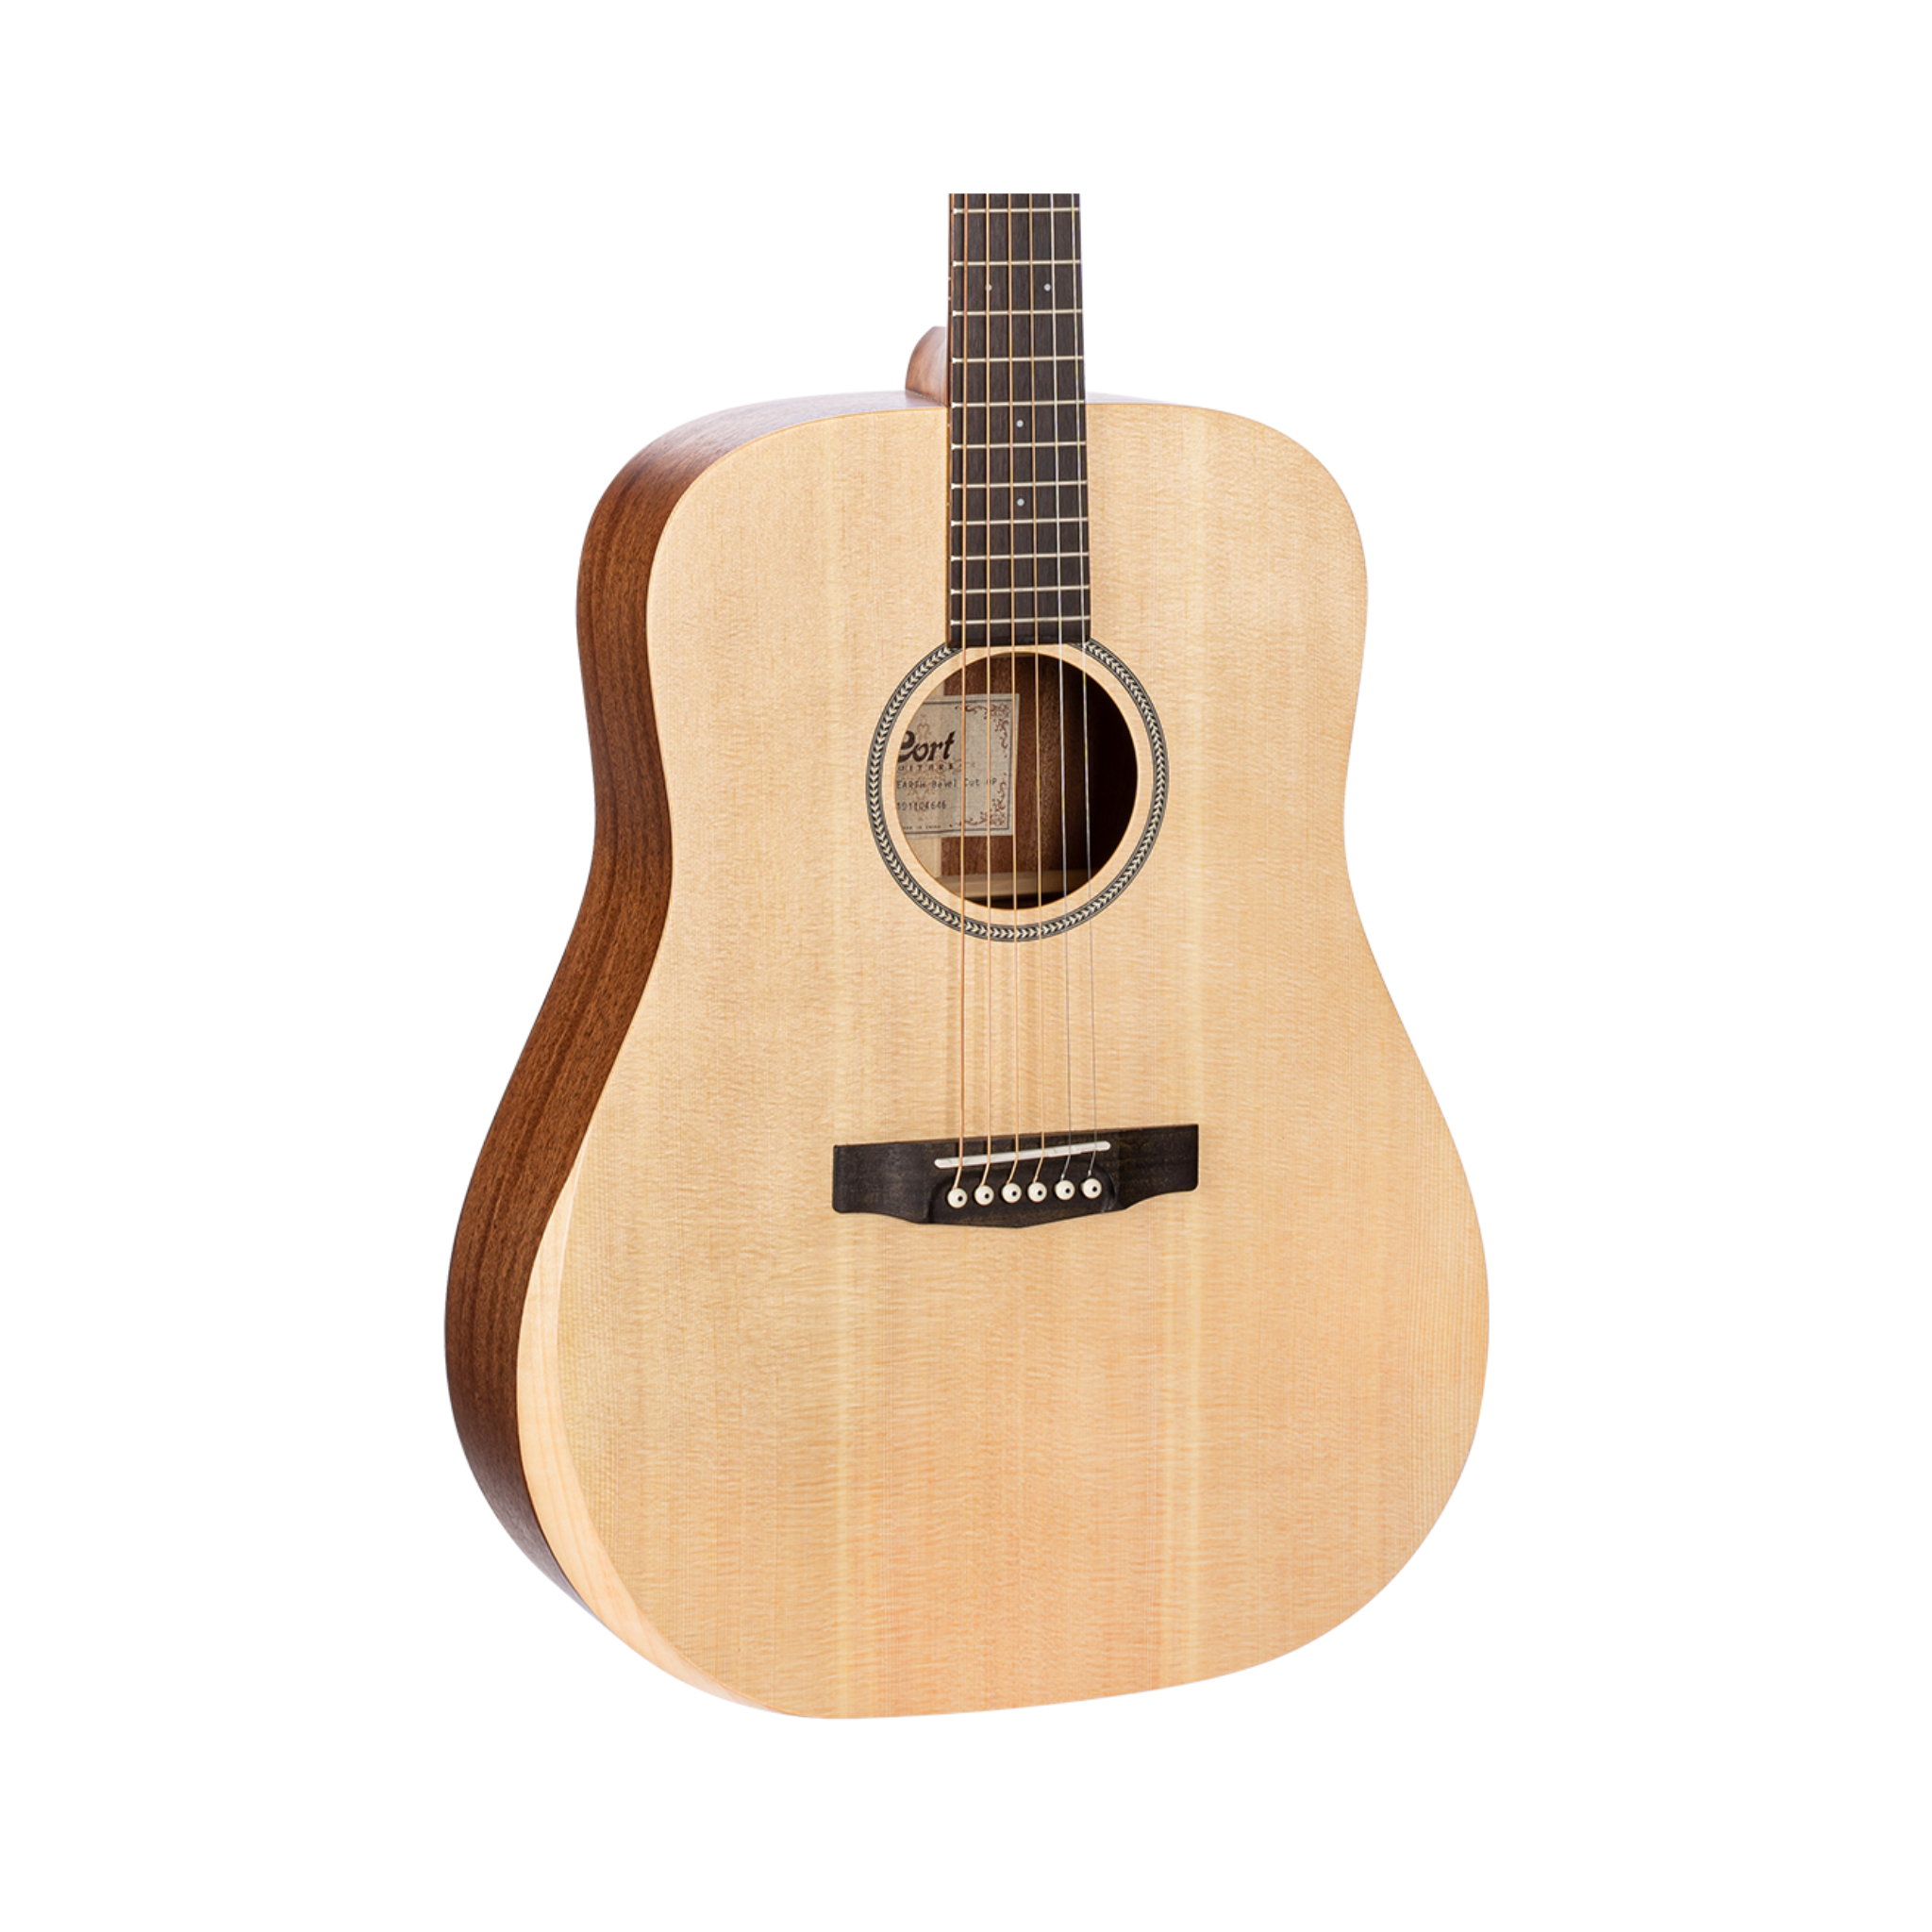 Solid Sitka Spruce Top / Mahogany Back & Sides